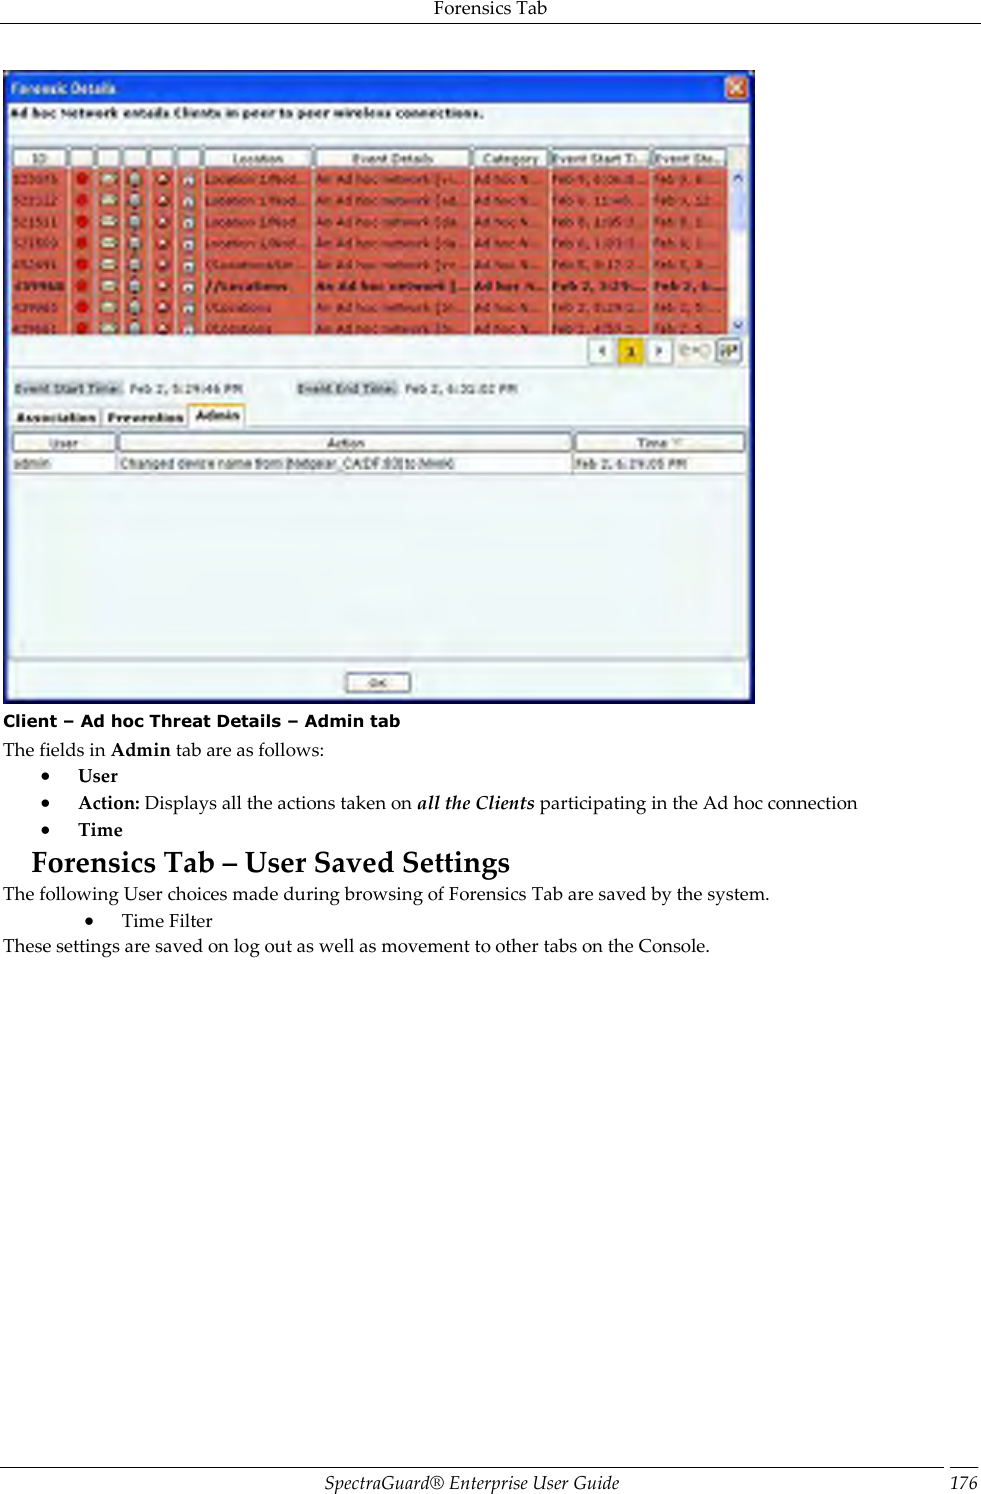 Forensics Tab SpectraGuard®  Enterprise User Guide 176  Client – Ad hoc Threat Details – Admin tab The fields in Admin tab are as follows:  User  Action: Displays all the actions taken on all the Clients participating in the Ad hoc connection  Time Forensics Tab – User Saved Settings The following User choices made during browsing of Forensics Tab are saved by the system.  Time Filter These settings are saved on log out as well as movement to other tabs on the Console. 